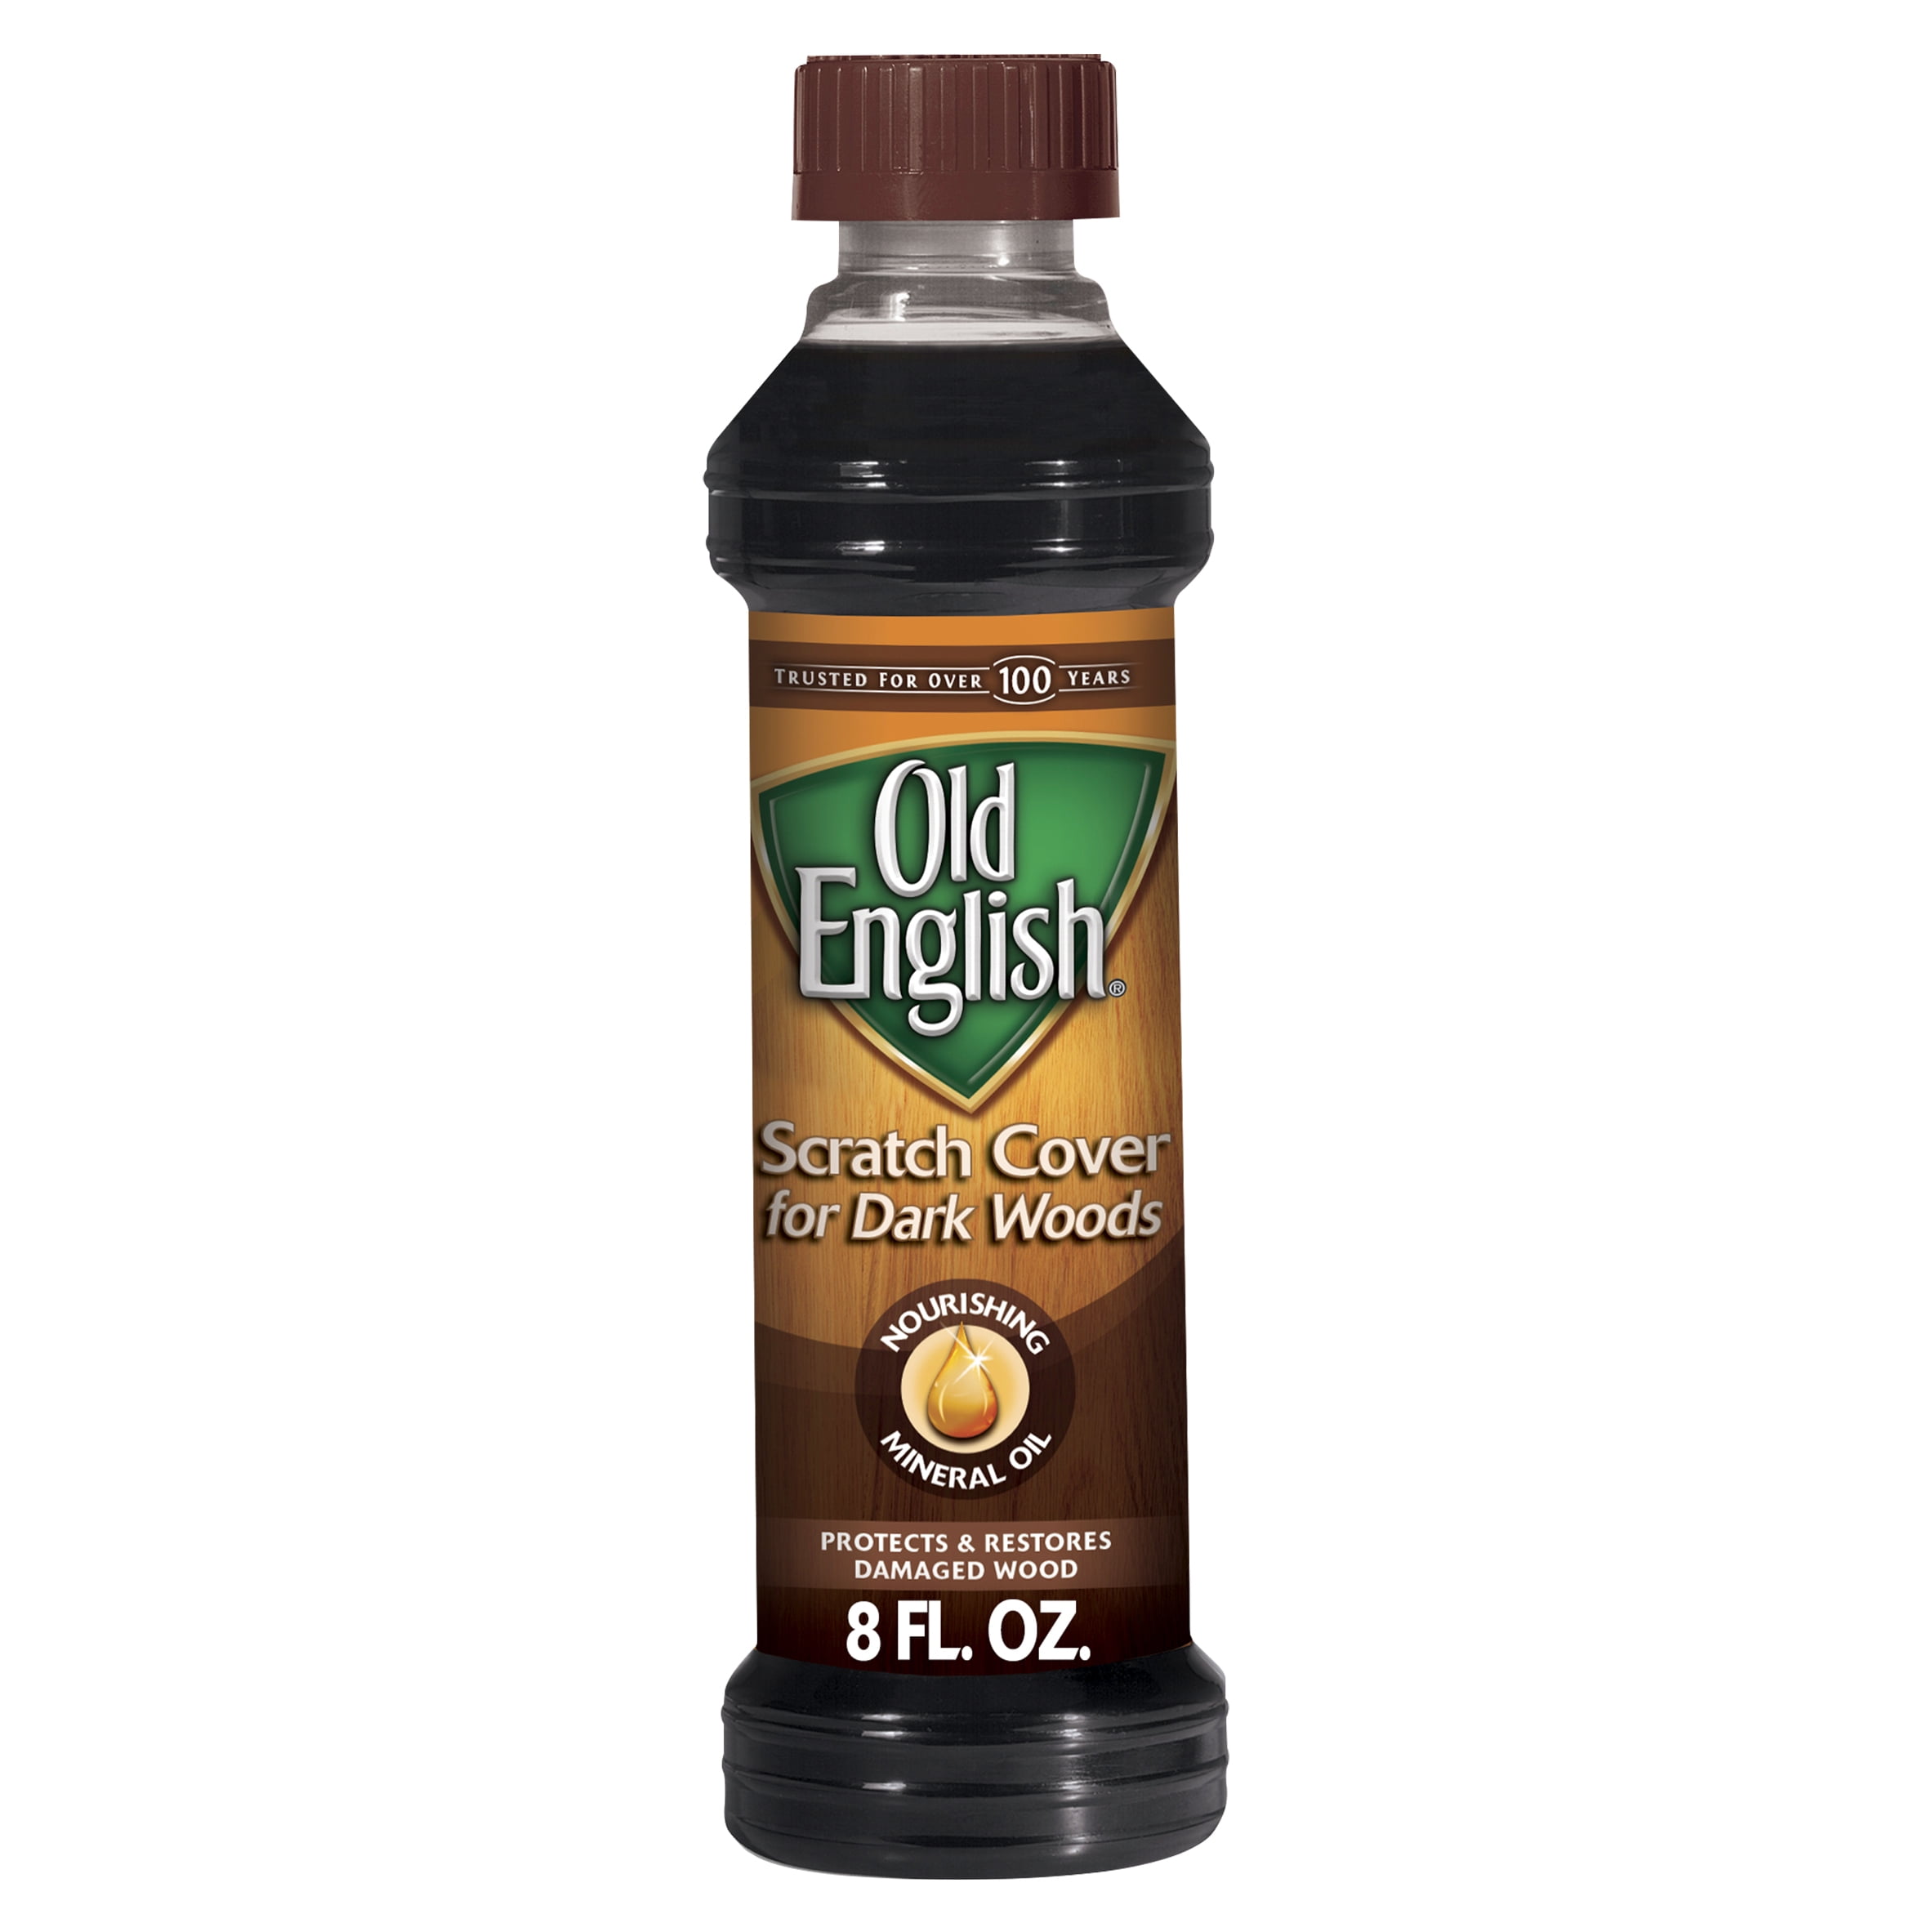 Old English Scratch Cover For Dark Woods, 8oz Bottle, Wood Polish